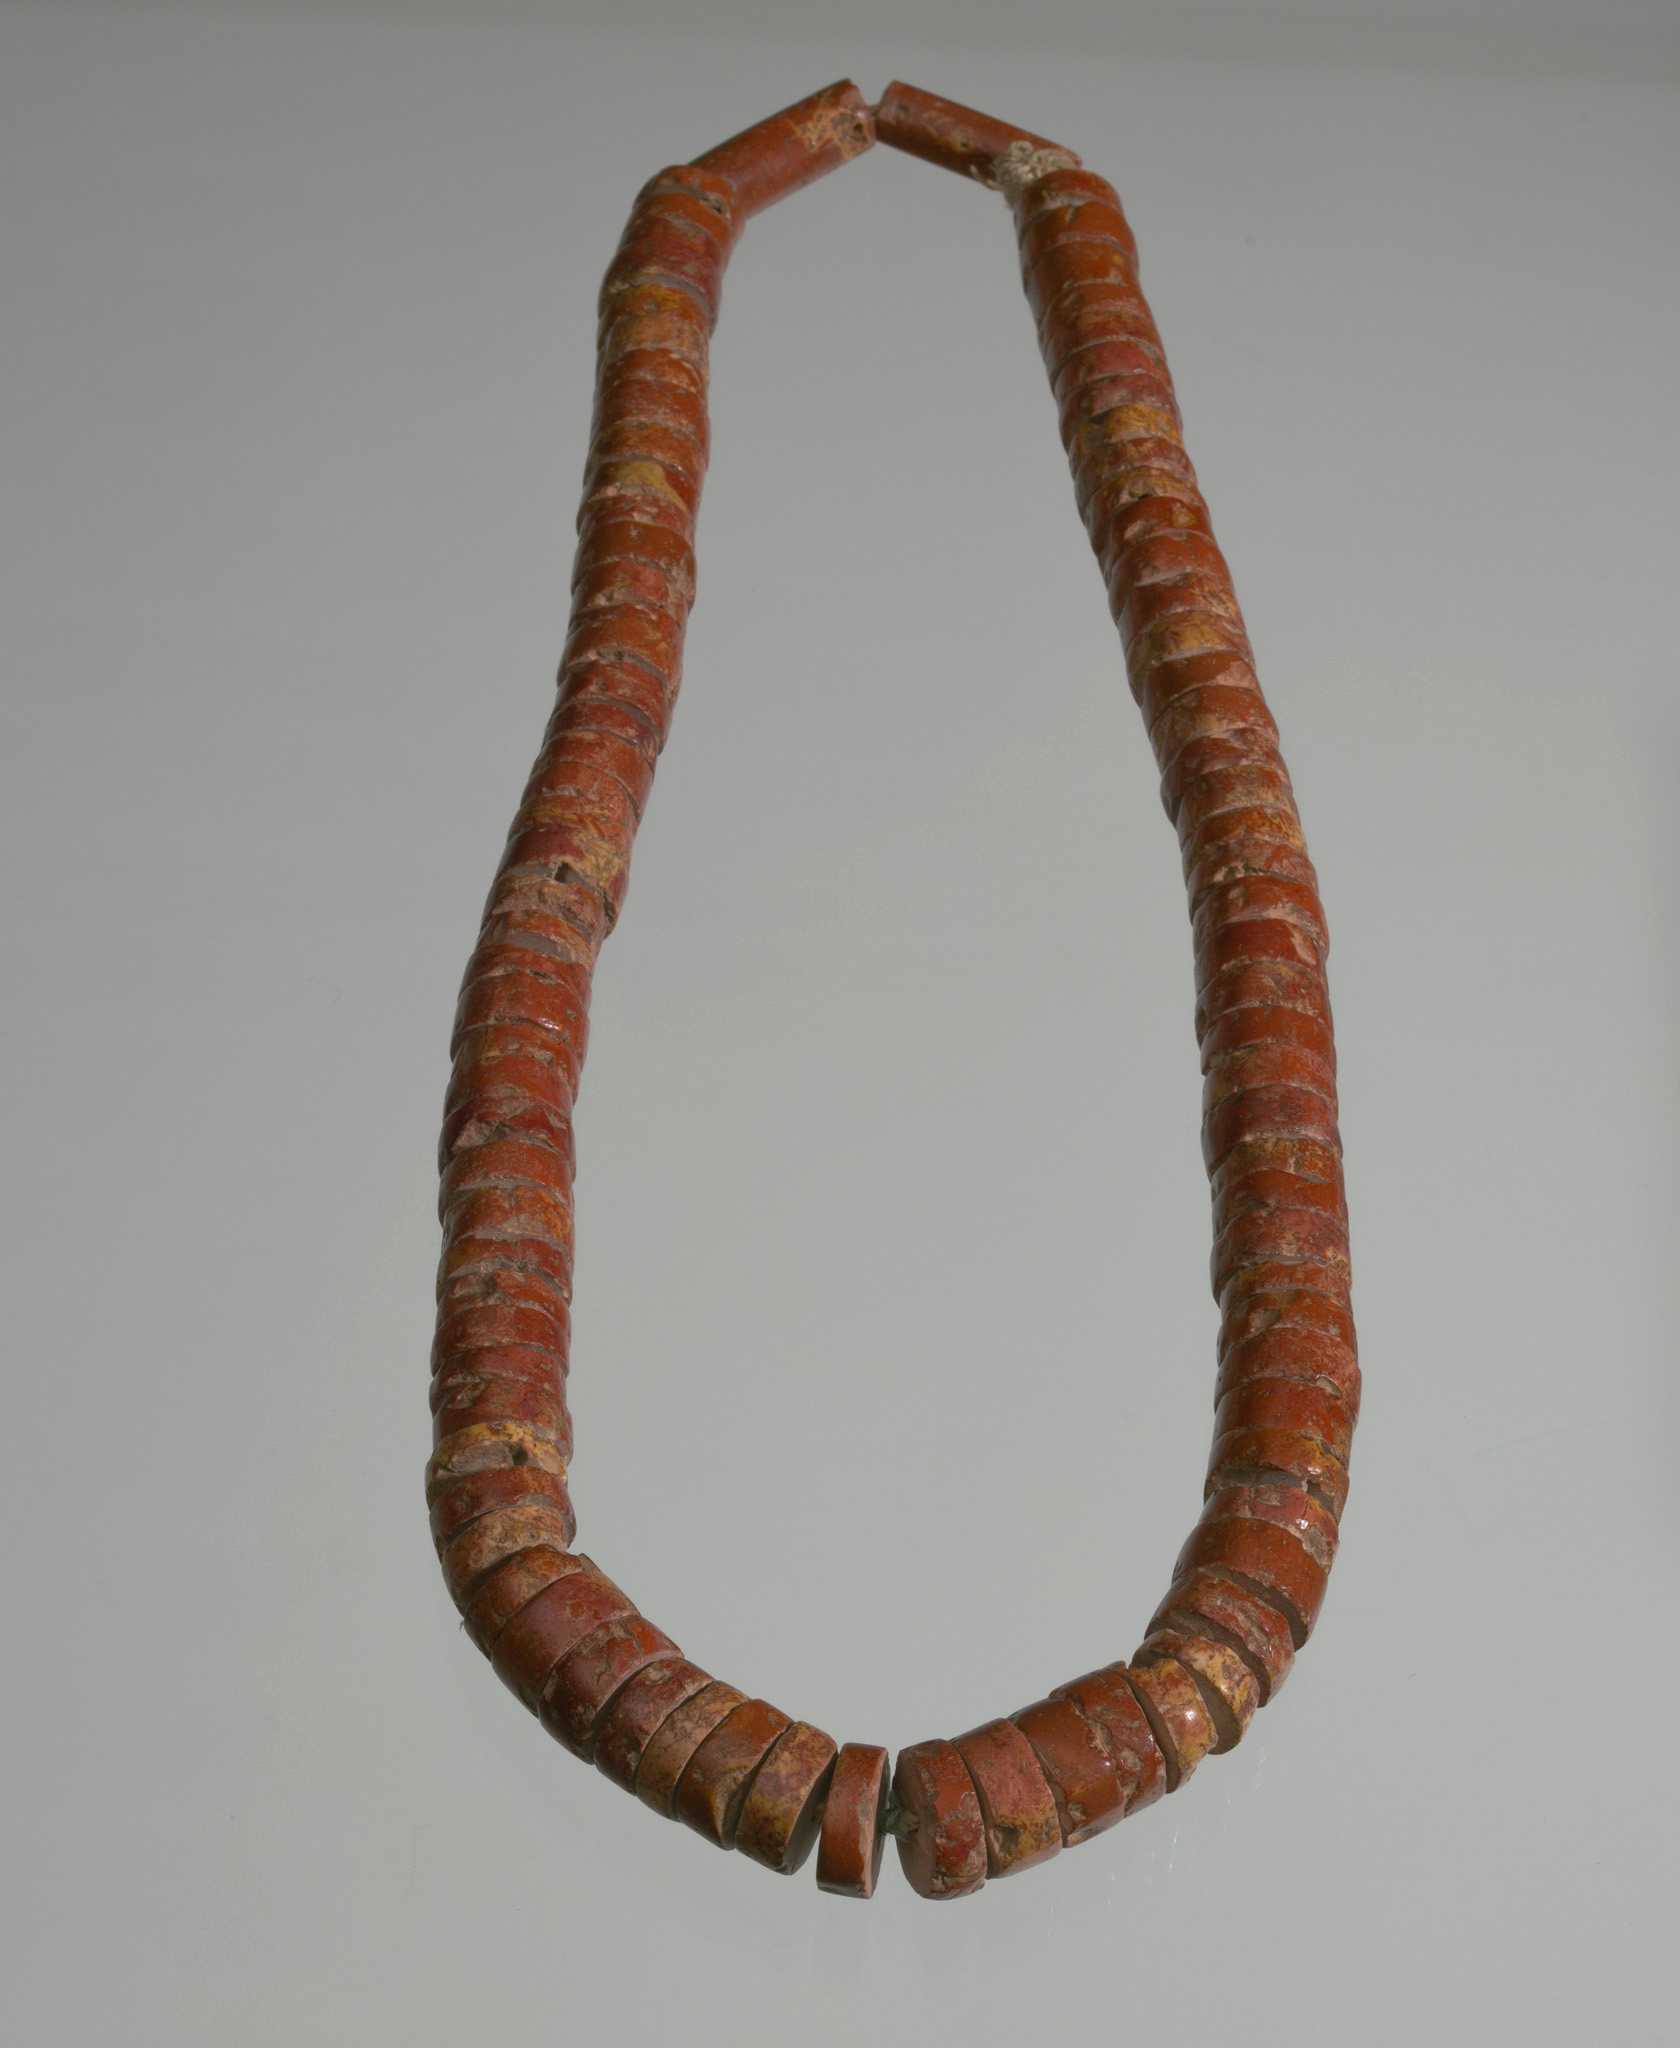 A looped strand of red colored beads on display against a grey background.